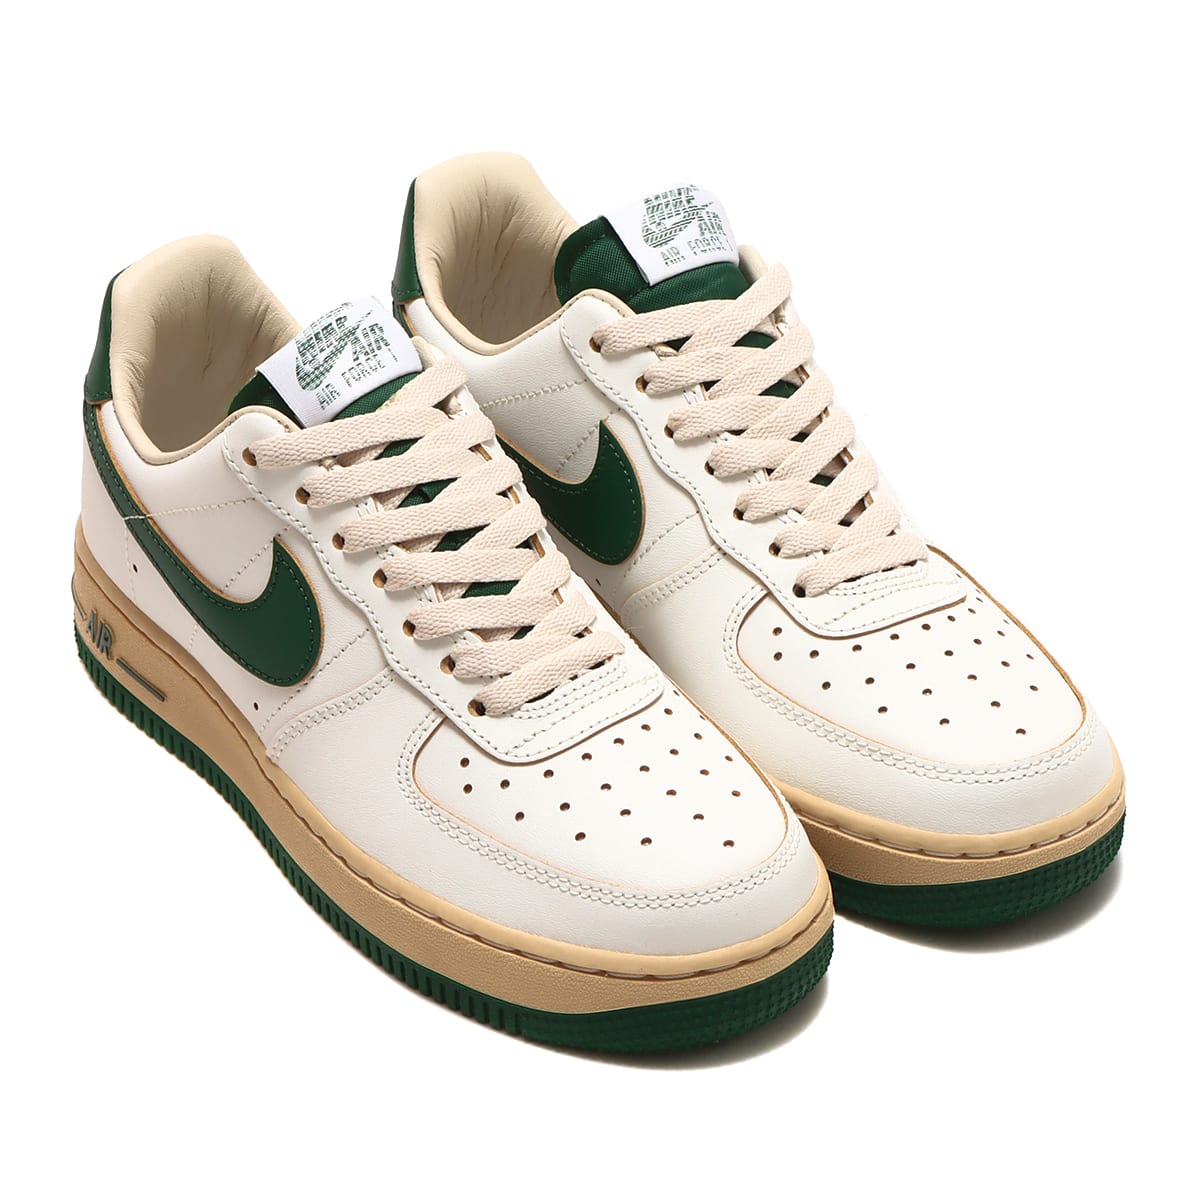 Naughty jelly Careful reading NIKE WMNS AIR FORCE 1 '07 LV8 SAIL/GORGE GREEN-SESAME-PEARL WHITE 22HO-I